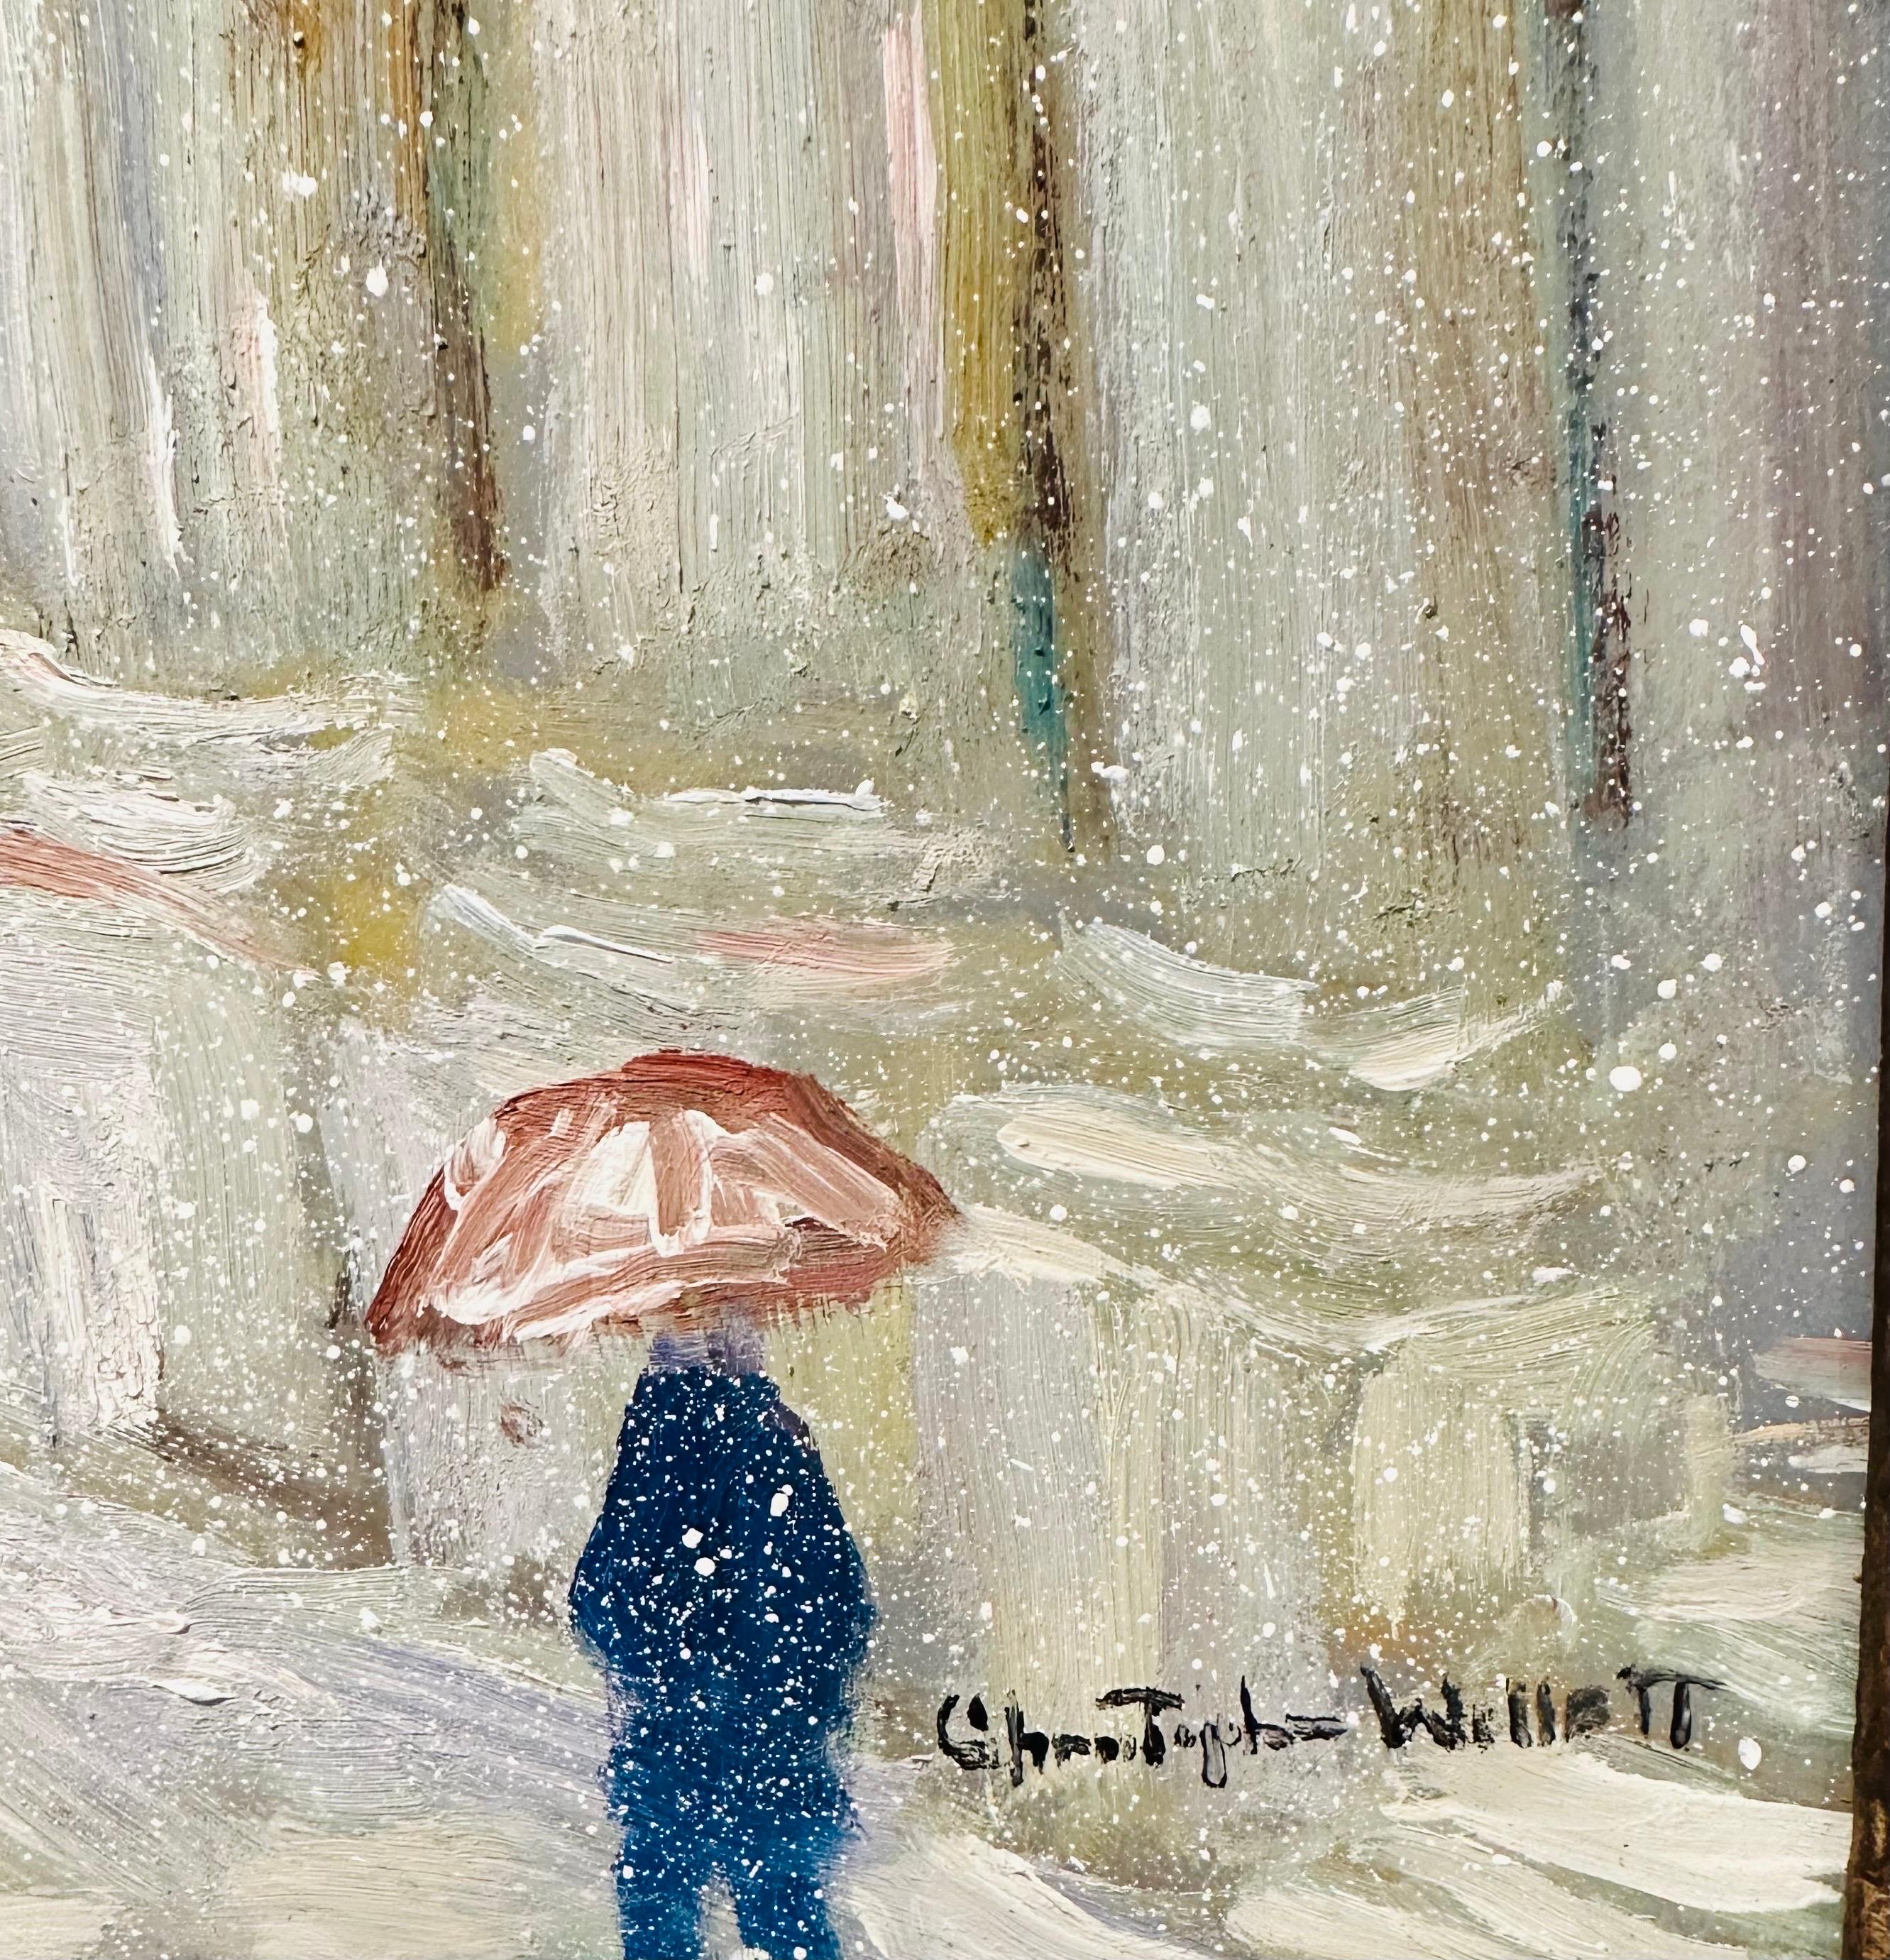 Canvas Traffic Jam in New York City Impressionist Winter Car Scene Oil Painting For Sale